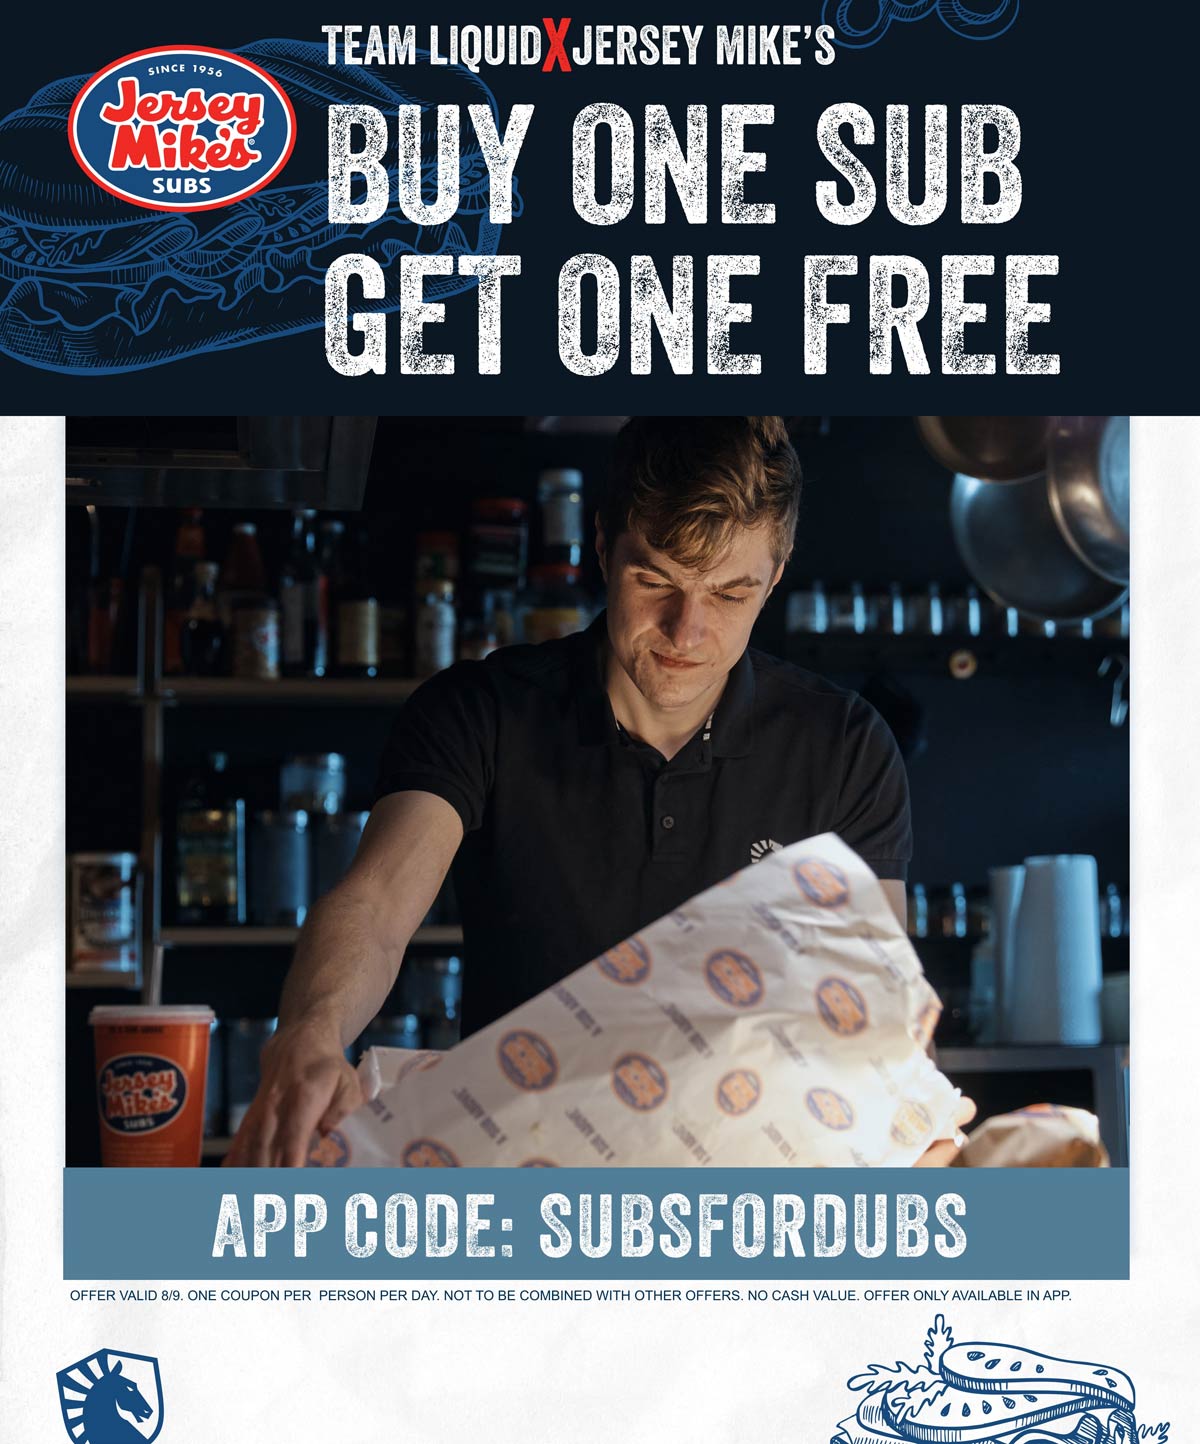 Jersey Mikes restaurants Coupon  Second sub sandwich free today at Jersey Mikes via promo code SUBSFORDUBS #jerseymikes 